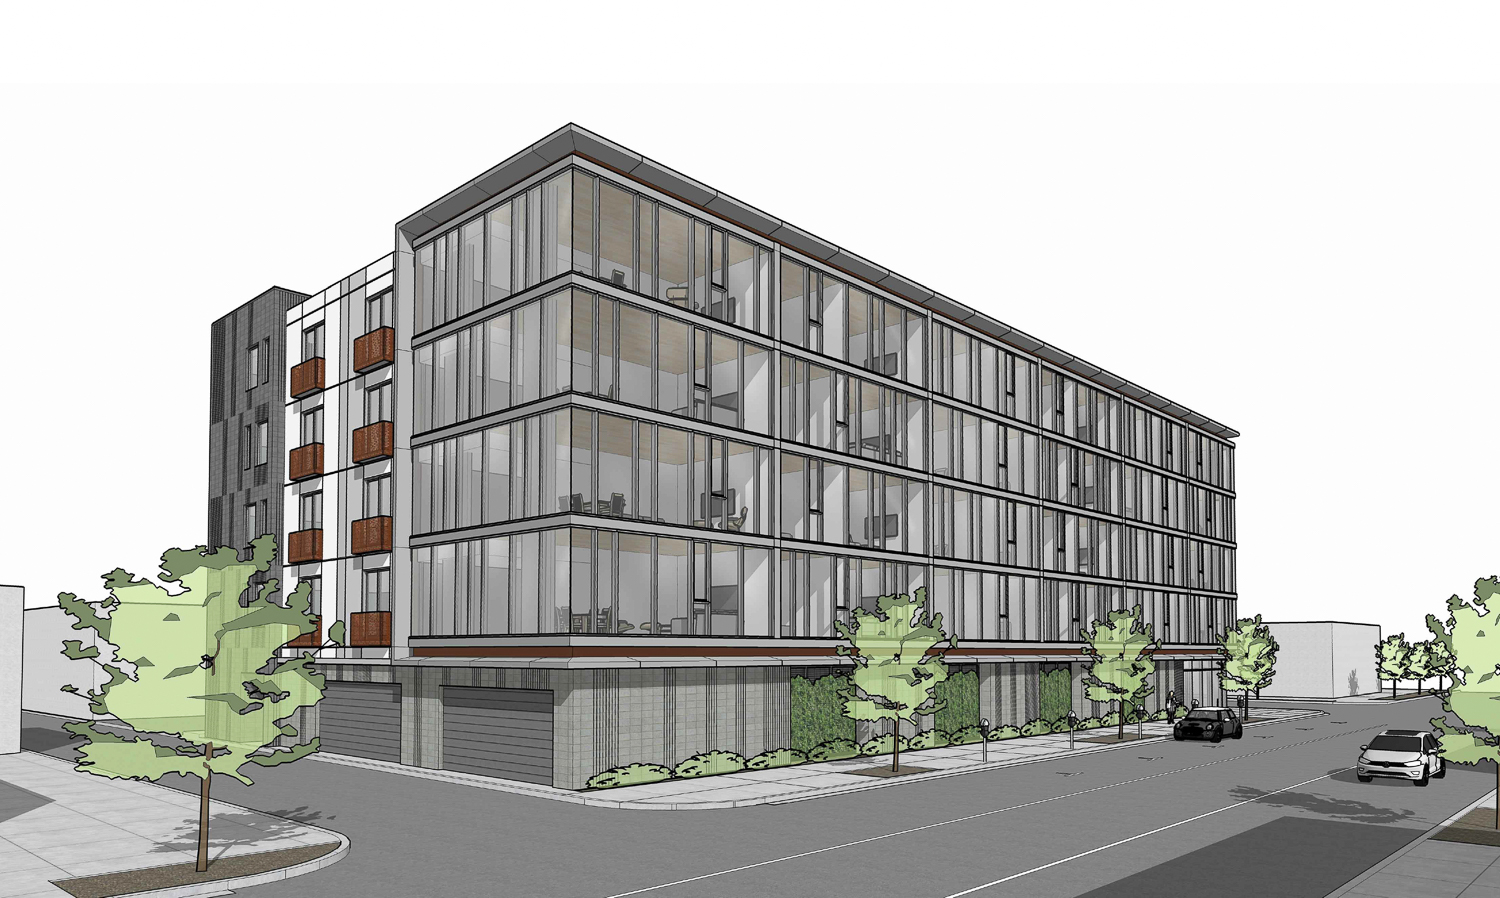 2101 J Street northwest view across 21st Street and Improv Alley, rendering by Vitae Architecture